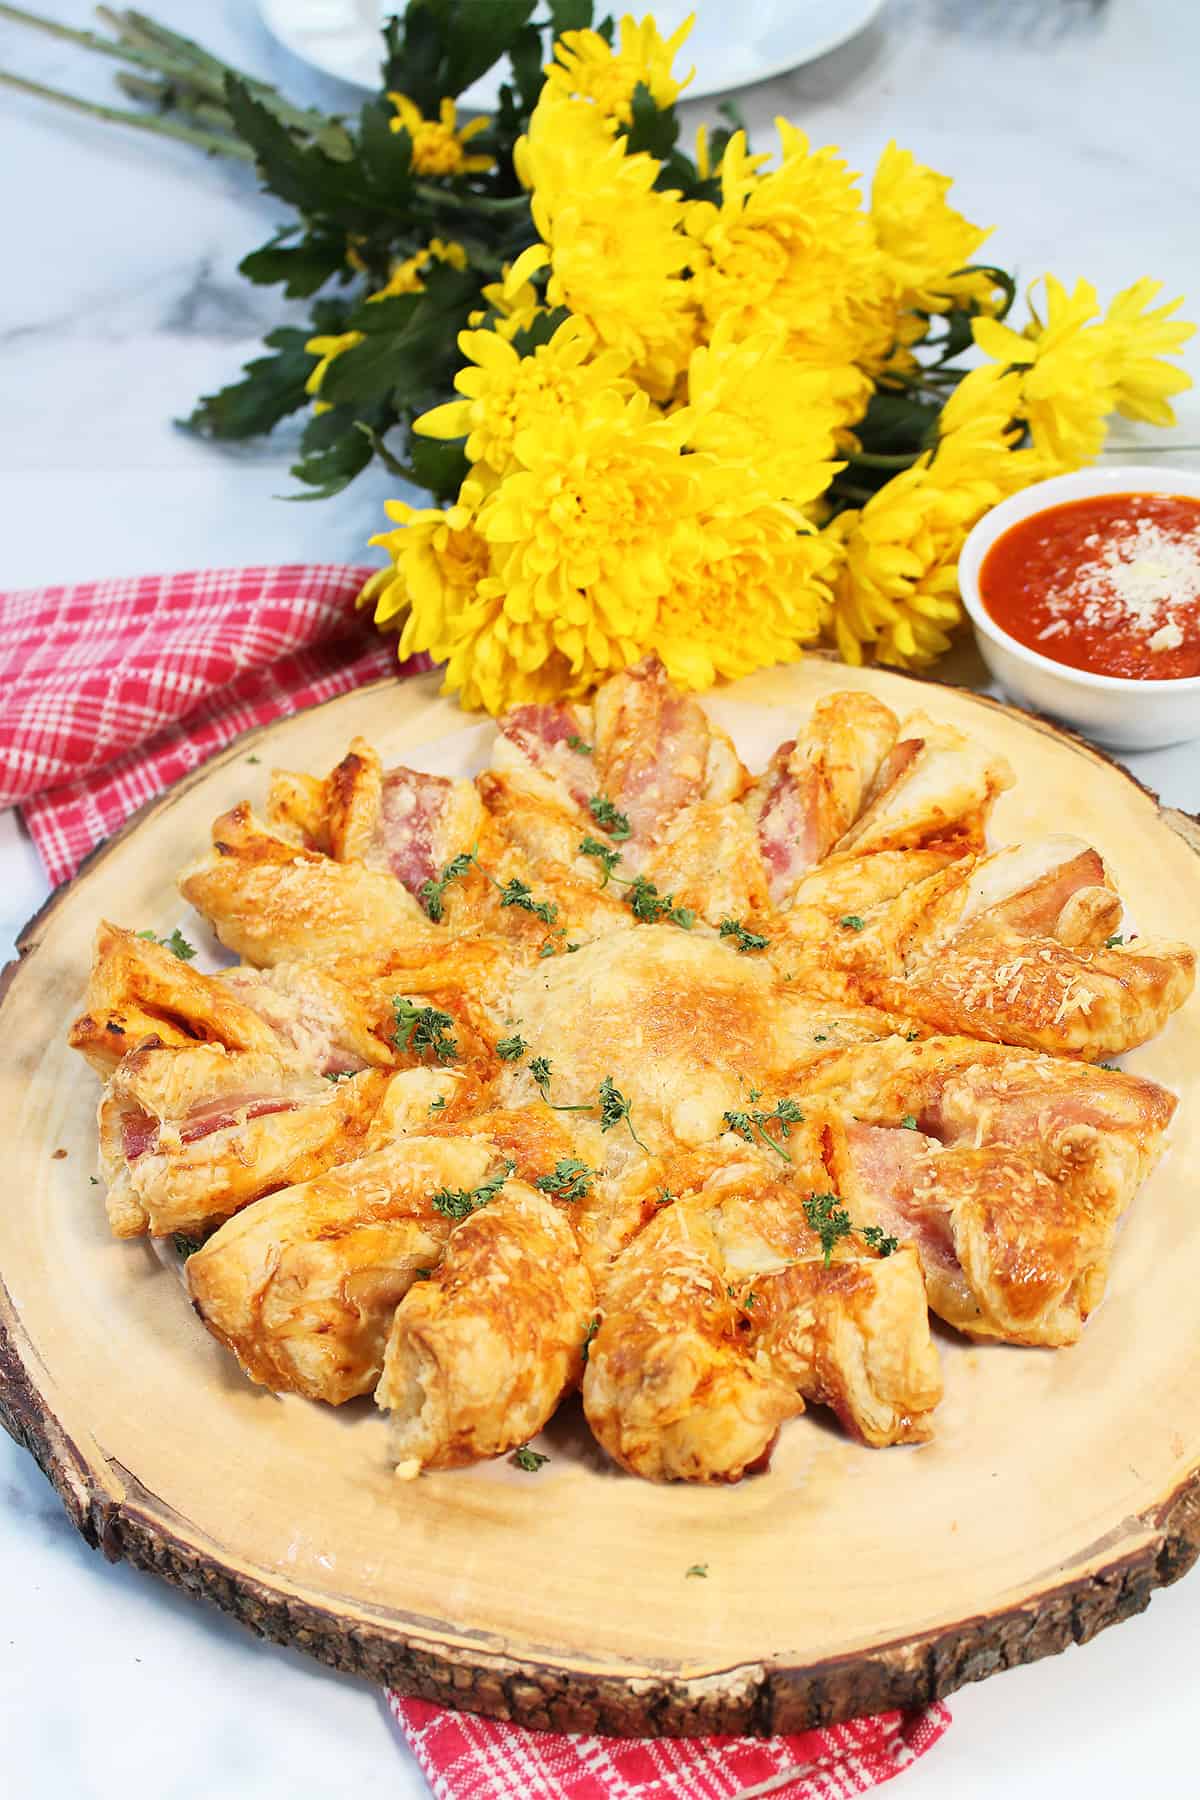 Puff Pastry Pizza Twists on wooden board with yellow flowers.